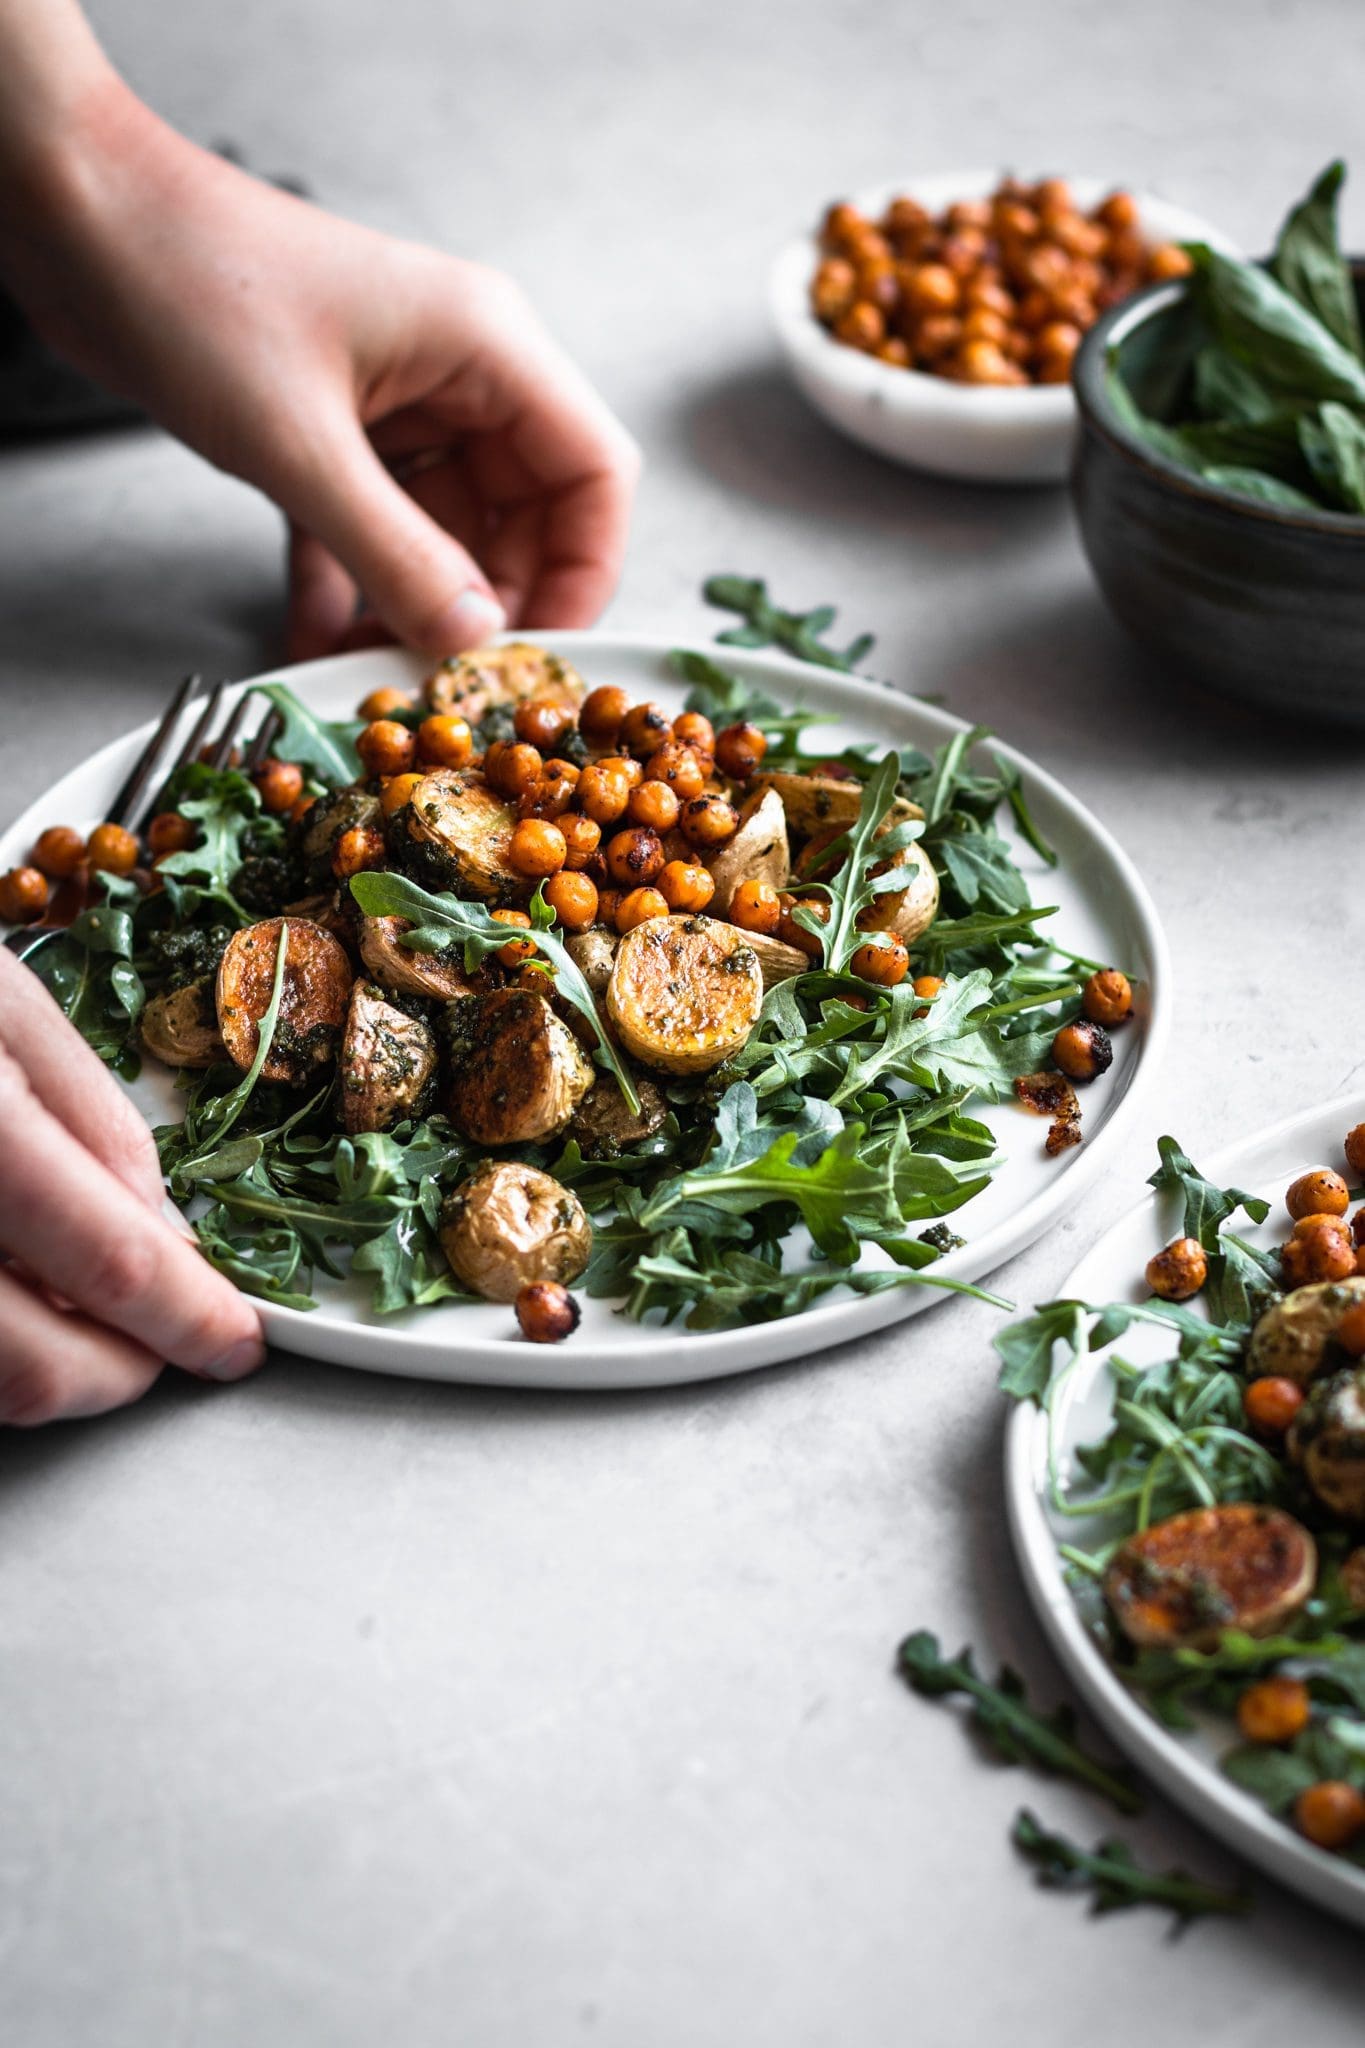 hands holding plate of roasted potato salad with chickpeas